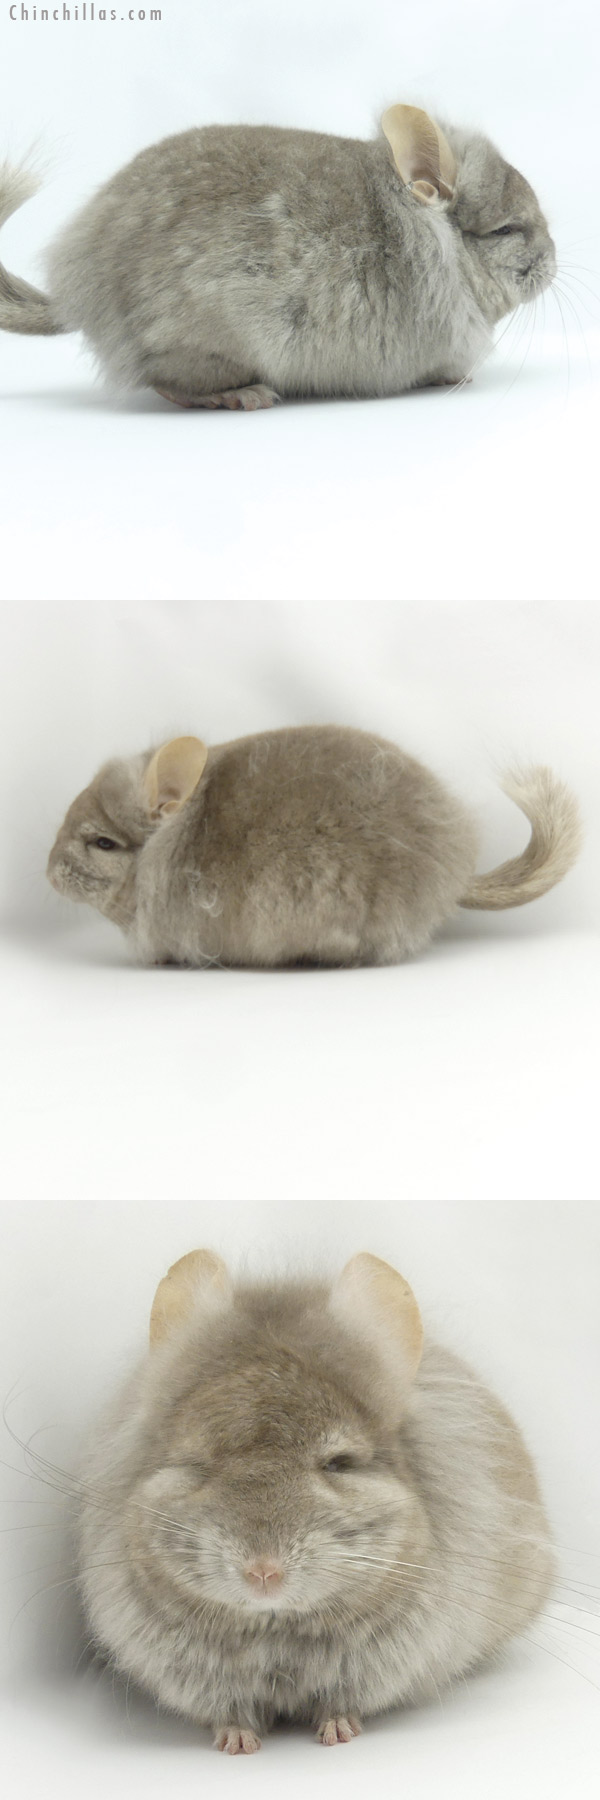 Chinchilla or related item offered for sale or export on Chinchillas.com - 19428 Tan ( Locken Carrier )  Royal Persian Angora Male Chinchilla